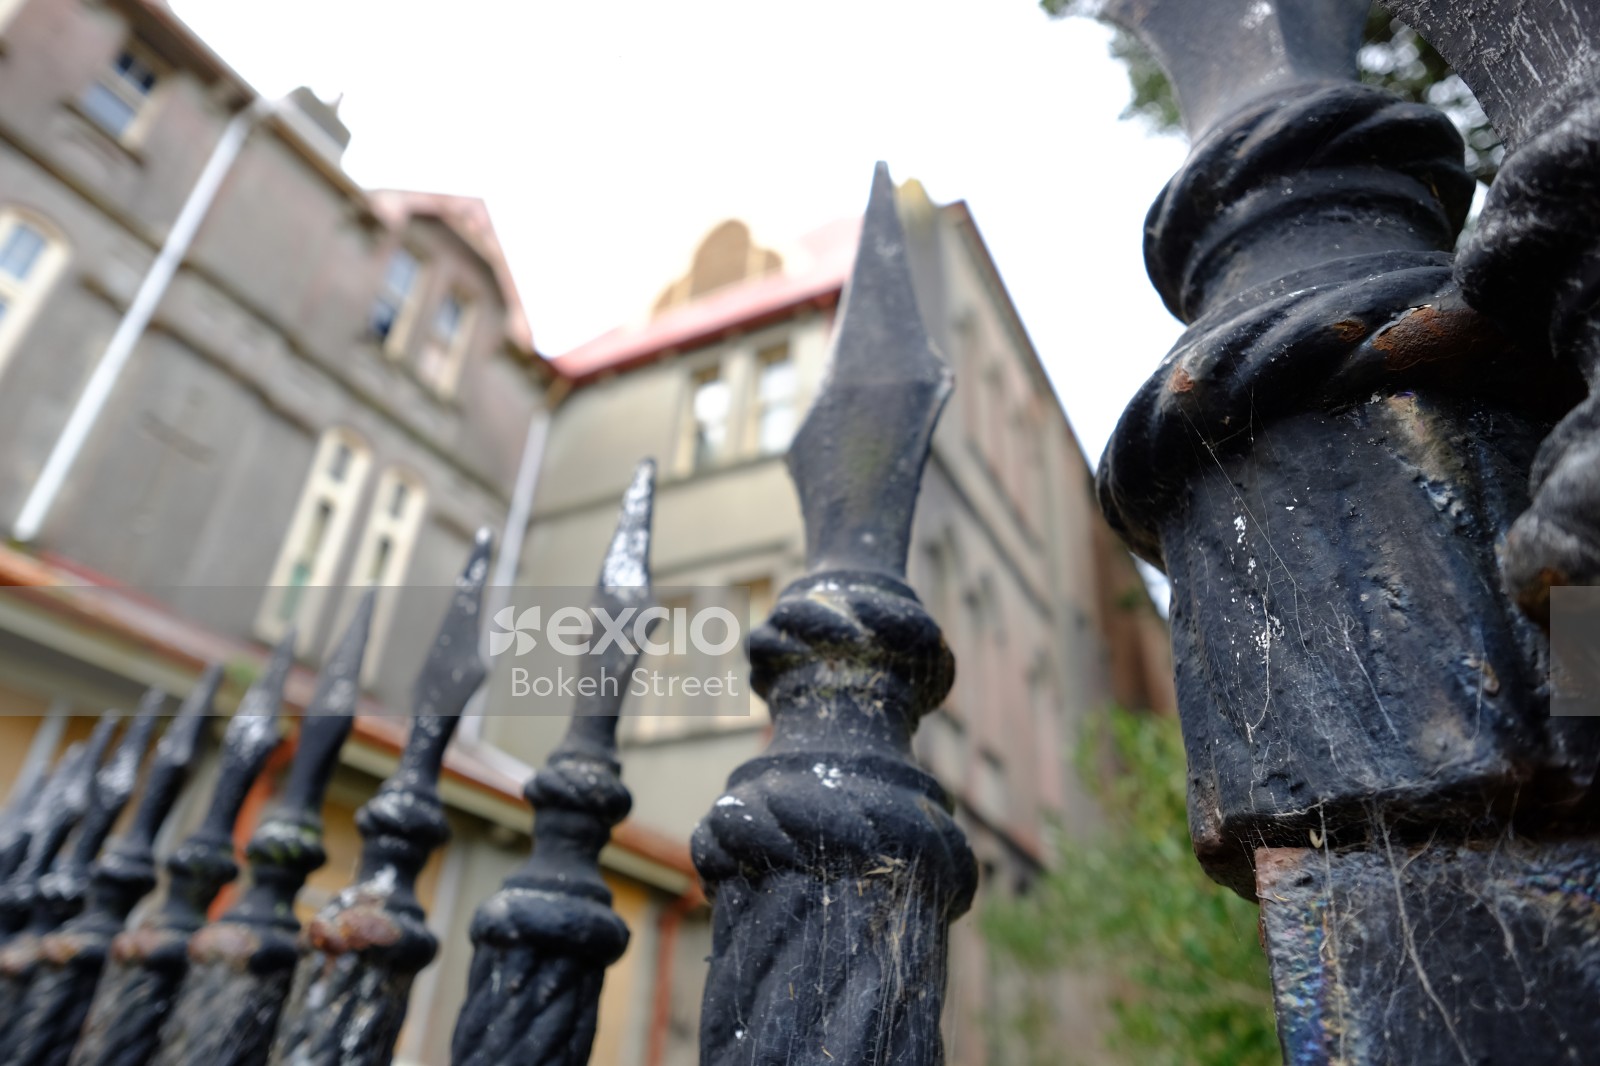 Iron railings in front of property